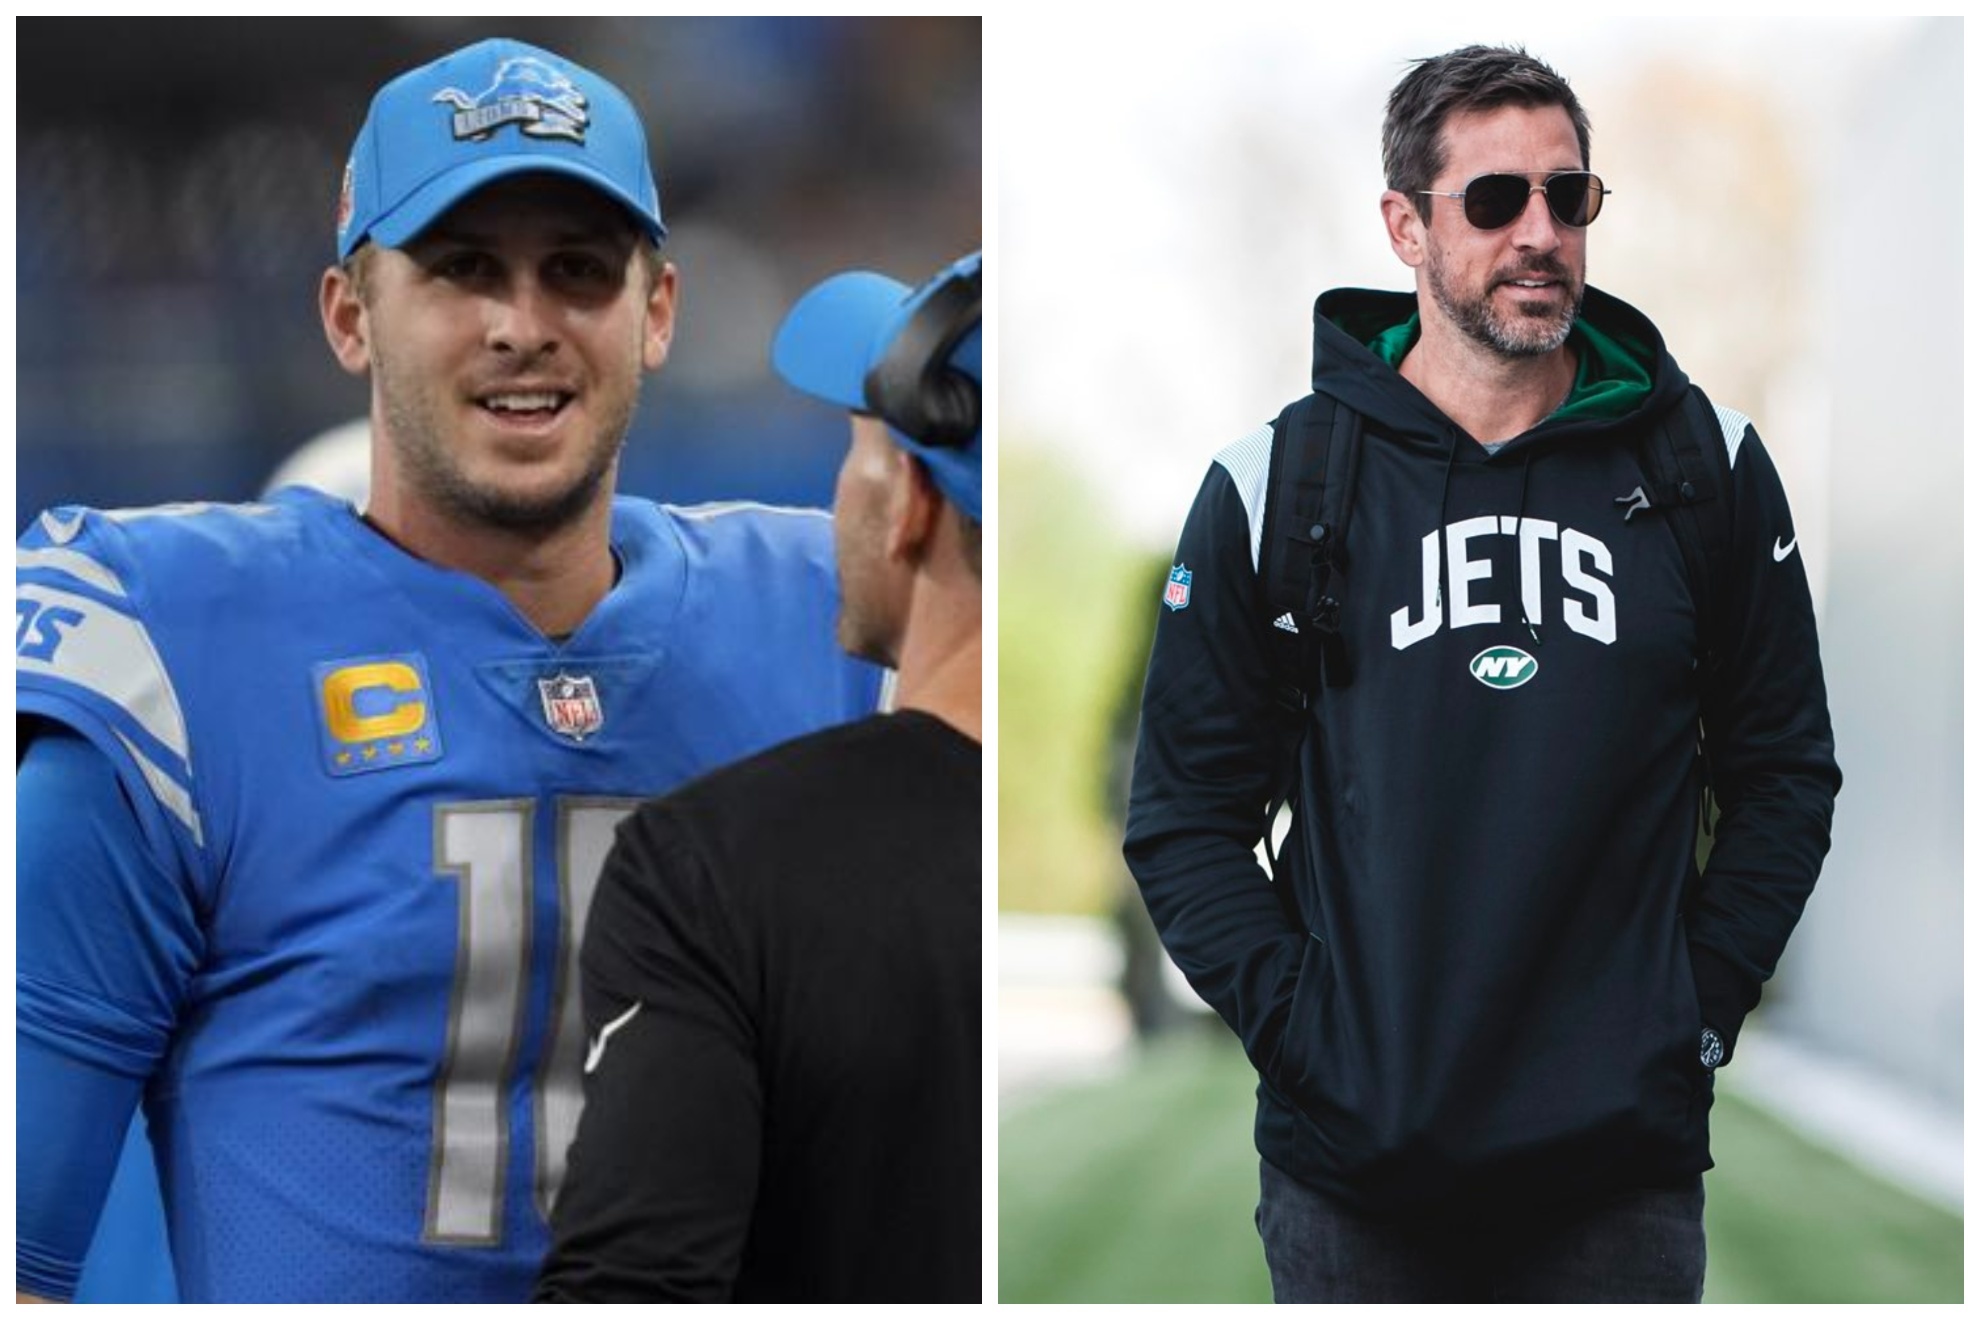 Jared Goff joked about Aaron Rodgers trade to the New York Jets.